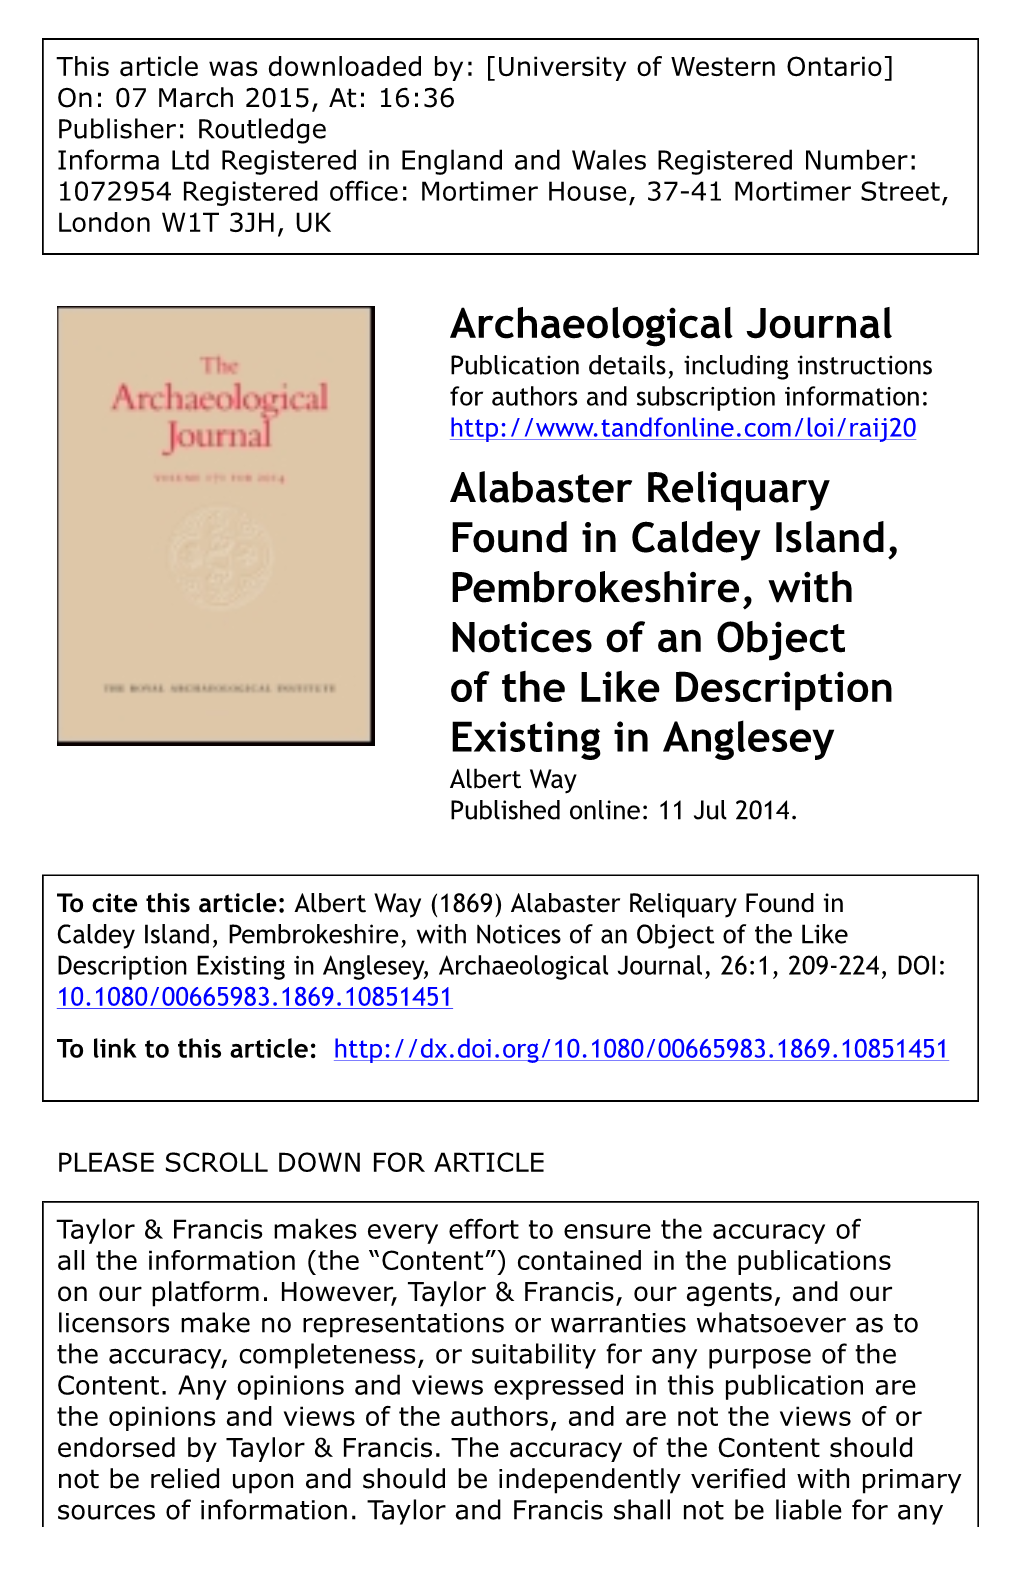 Archaeological Journal Alabaster Reliquary Found in Caldey Island